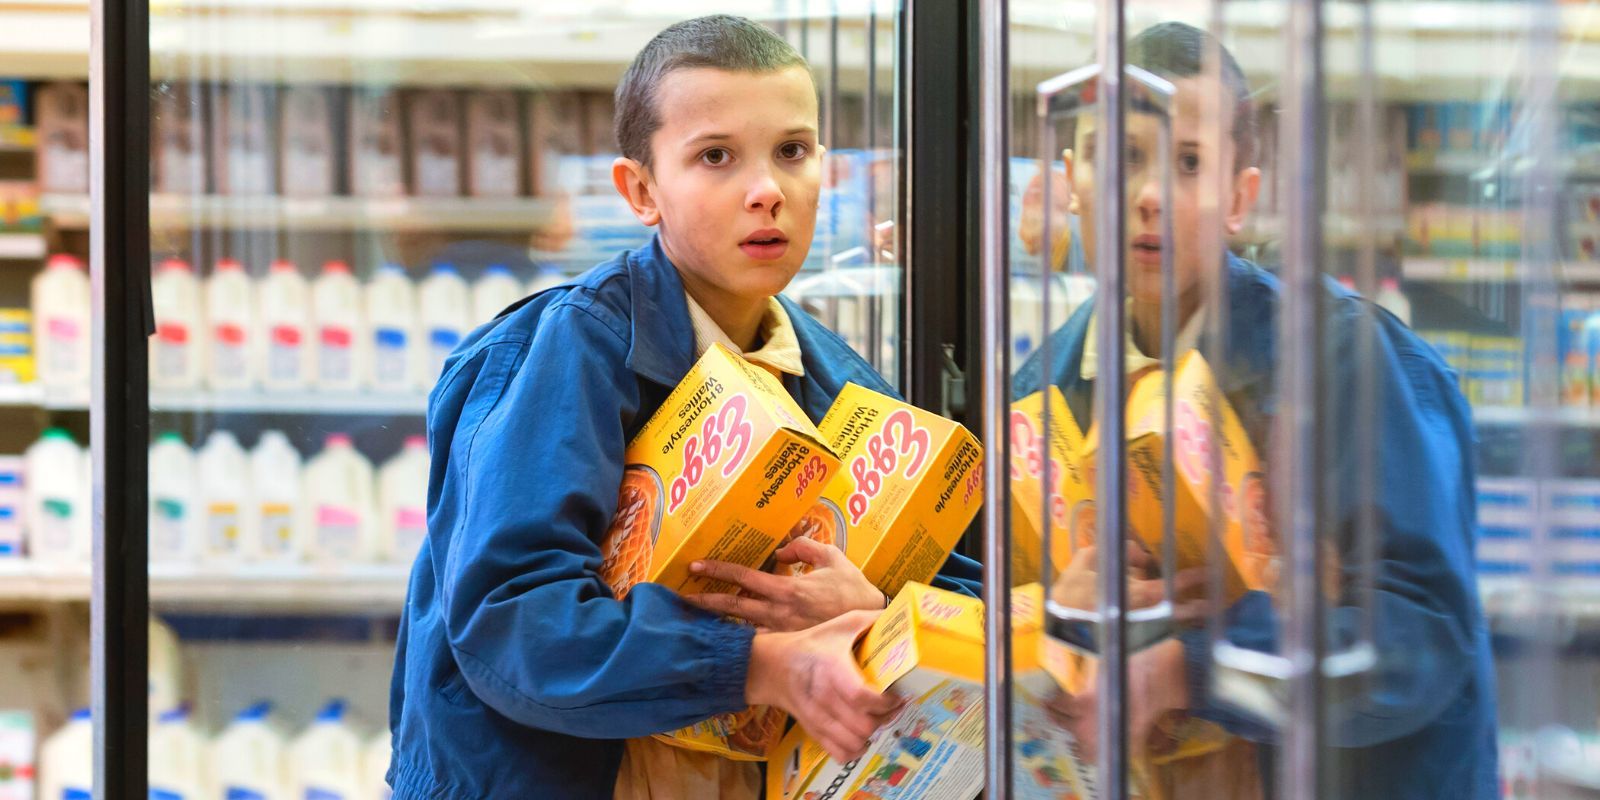 Stranger Things' Eleven as she pilfers an armful of Eggos